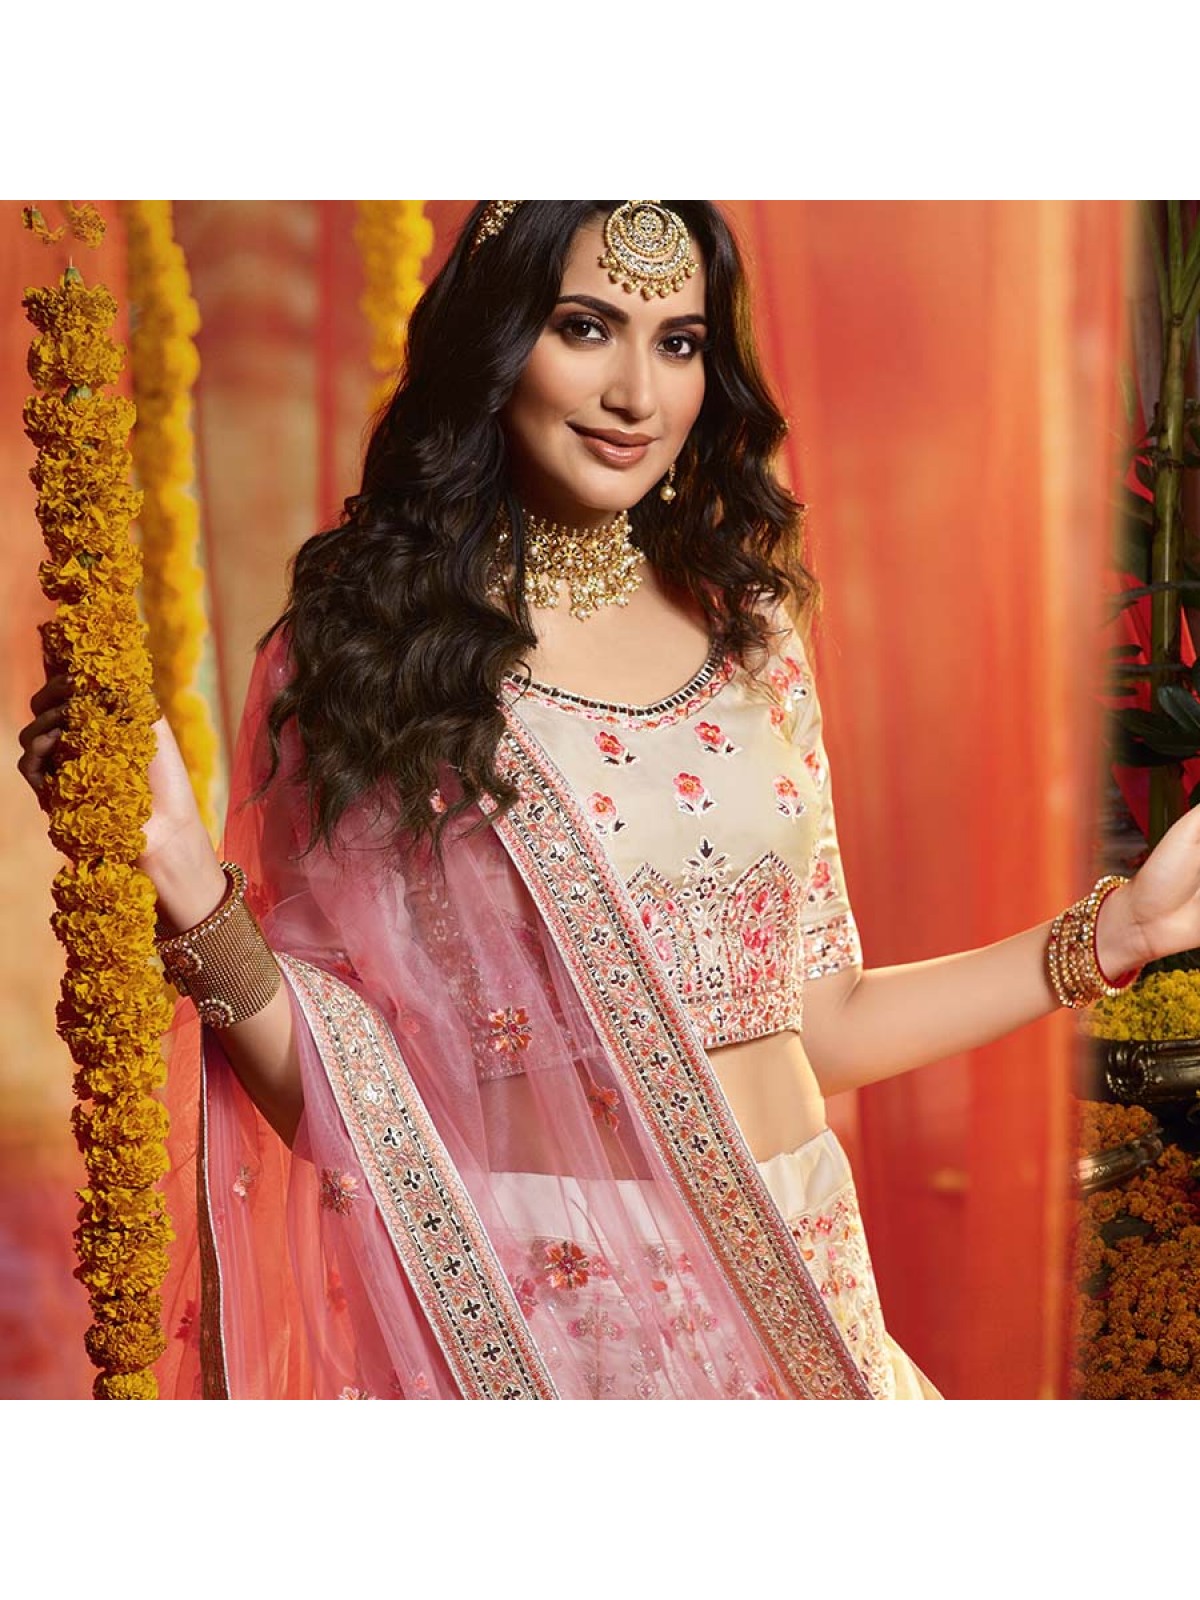 The easiest 9 ways to match your Jewellery with your Lehenga